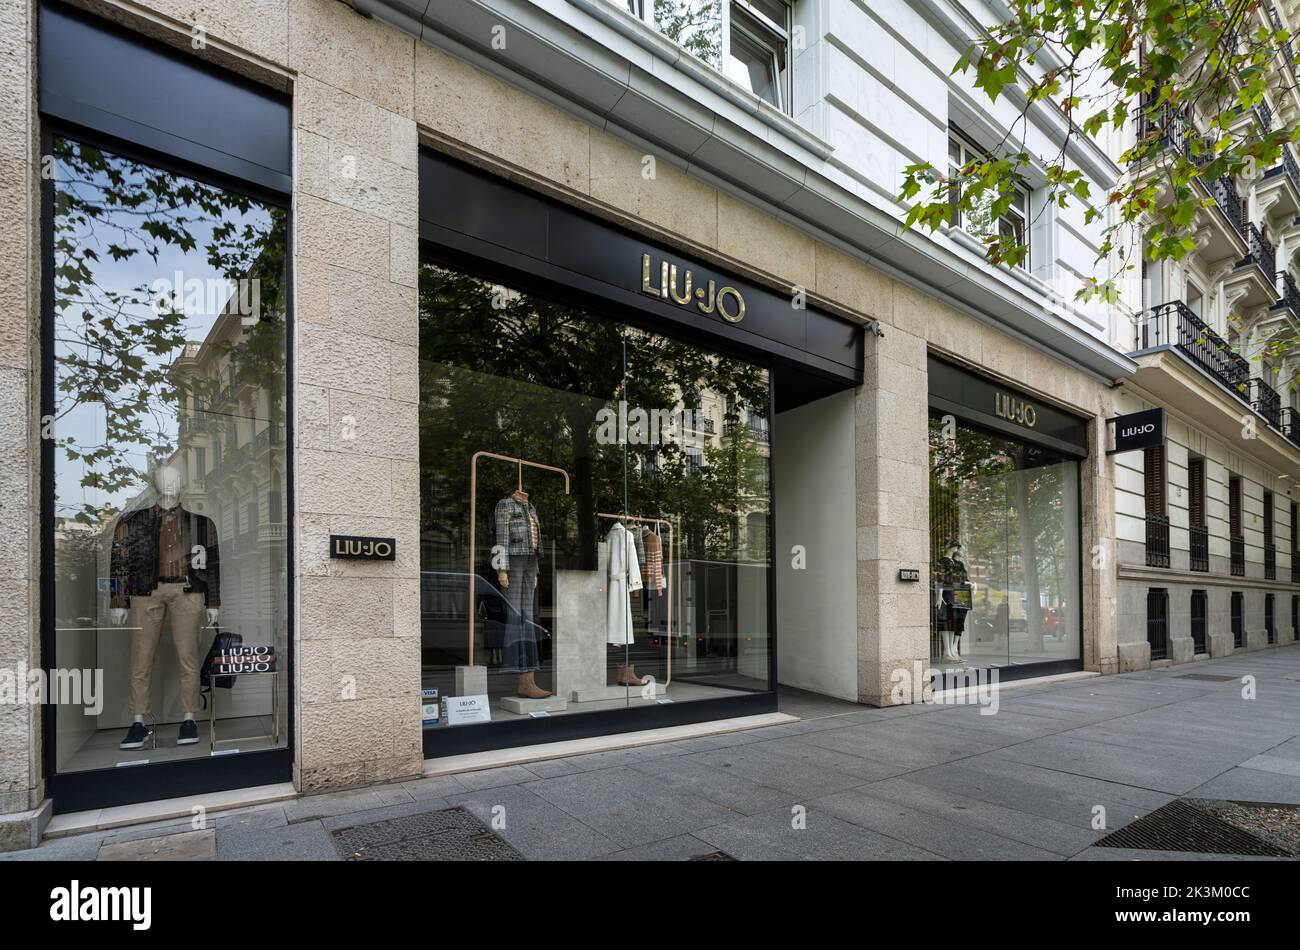 Madrid, Spain, September 2022. view of the Liu Jo fashion brand sign out of the store in the city center Stock Photo